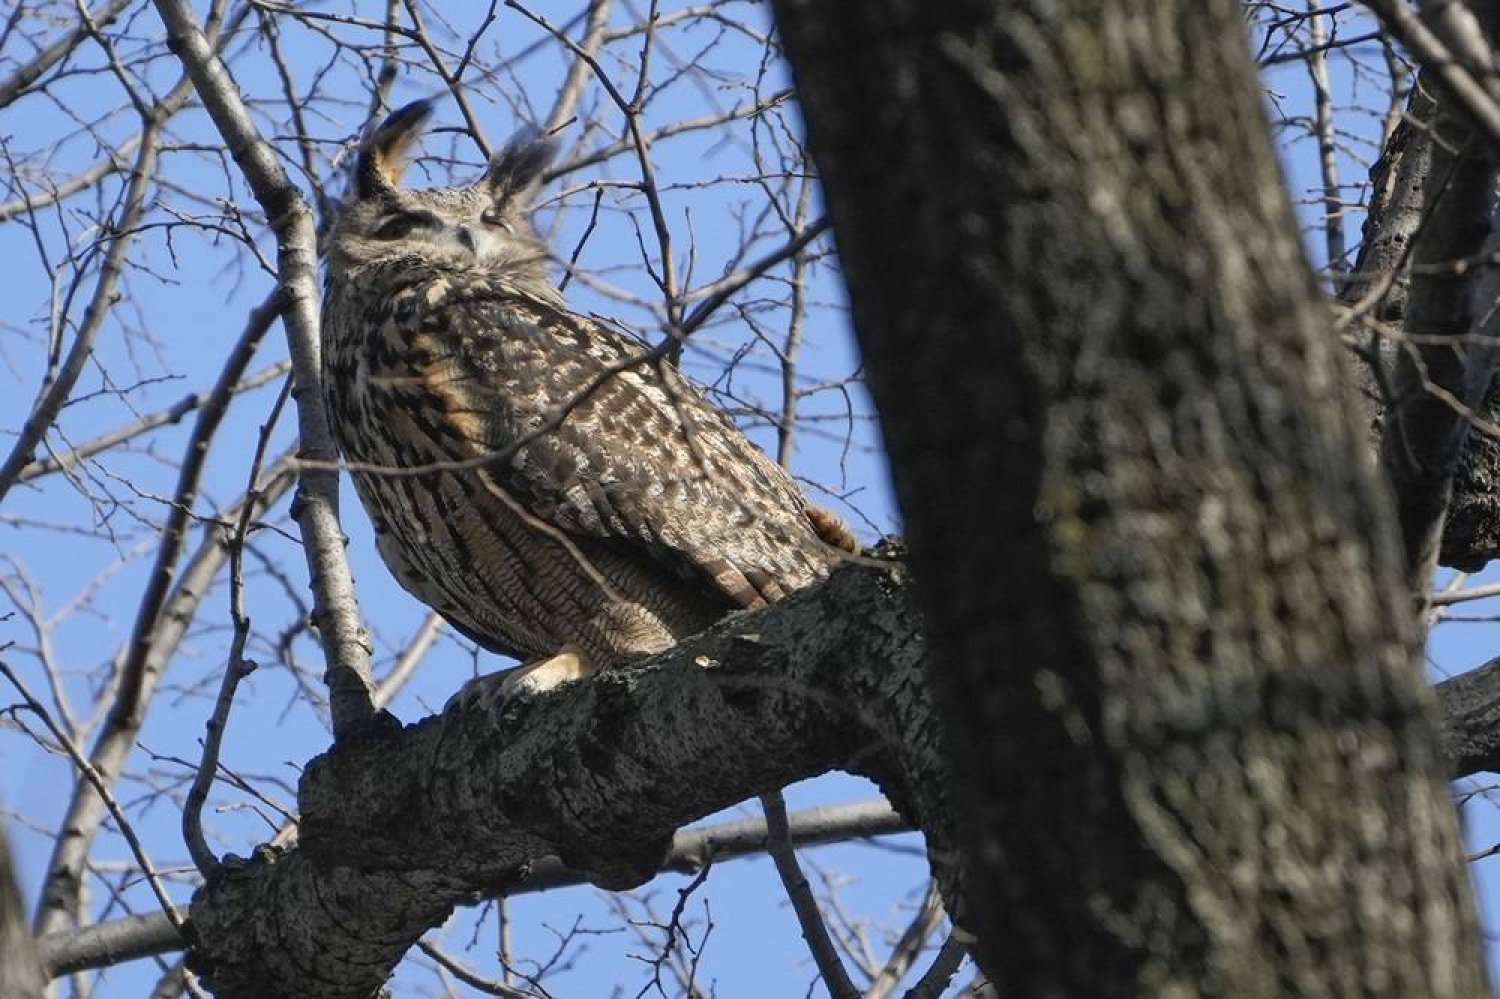 A Eurasian eagle-owl named Flaco sits in a tree in New York's Central Park, Feb. 6, 2023. (AP)